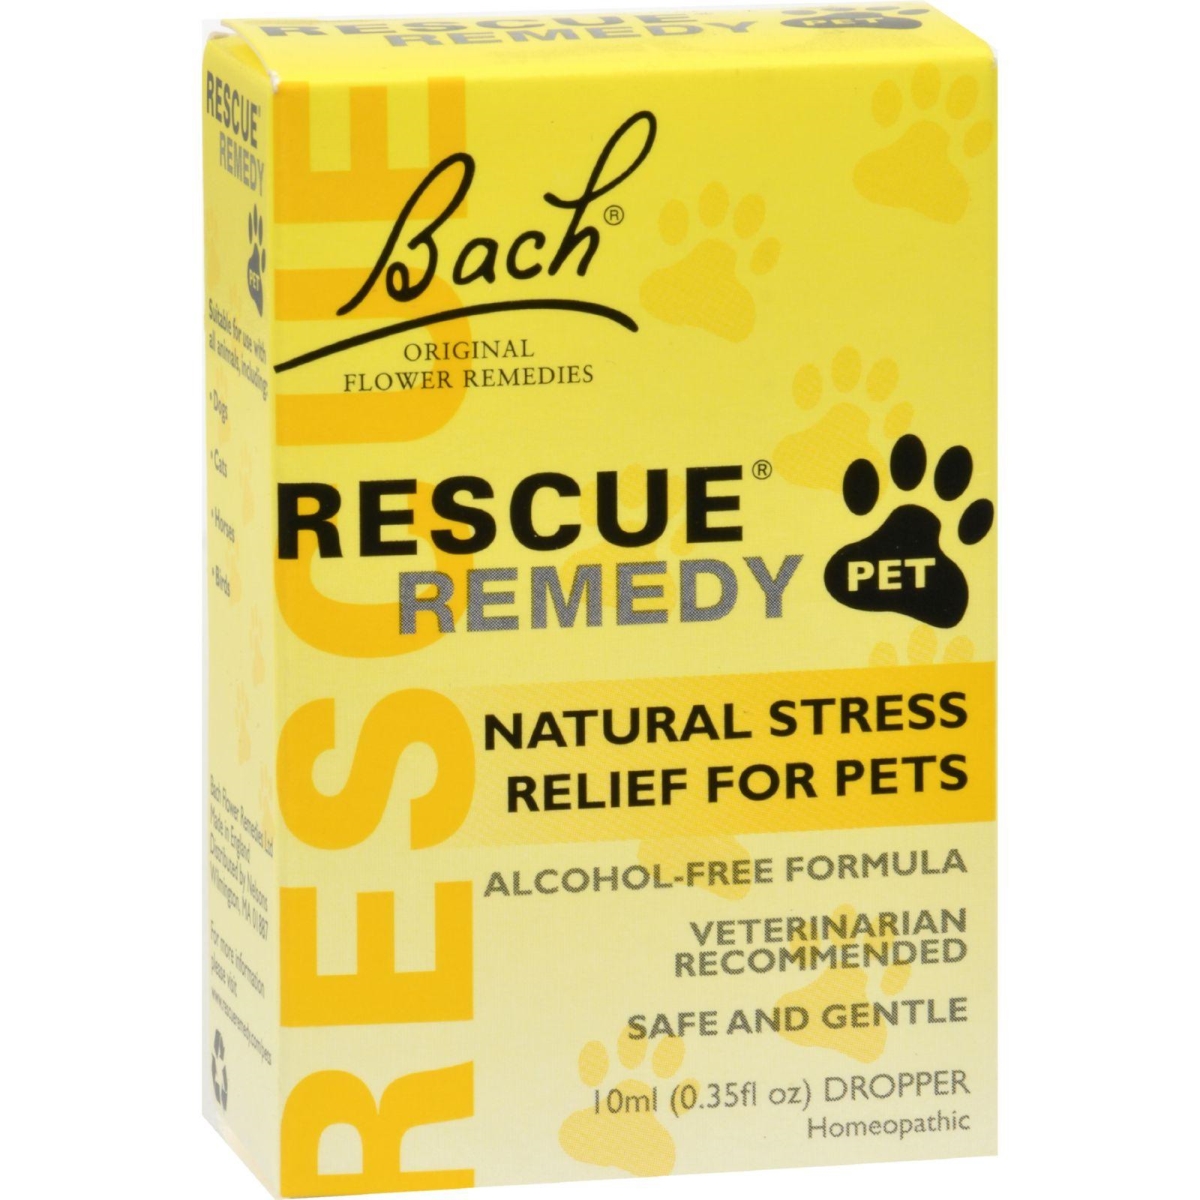 Hg0410167 10 Ml Flower Remedies Rescue Remedy Stress Relief For Pets